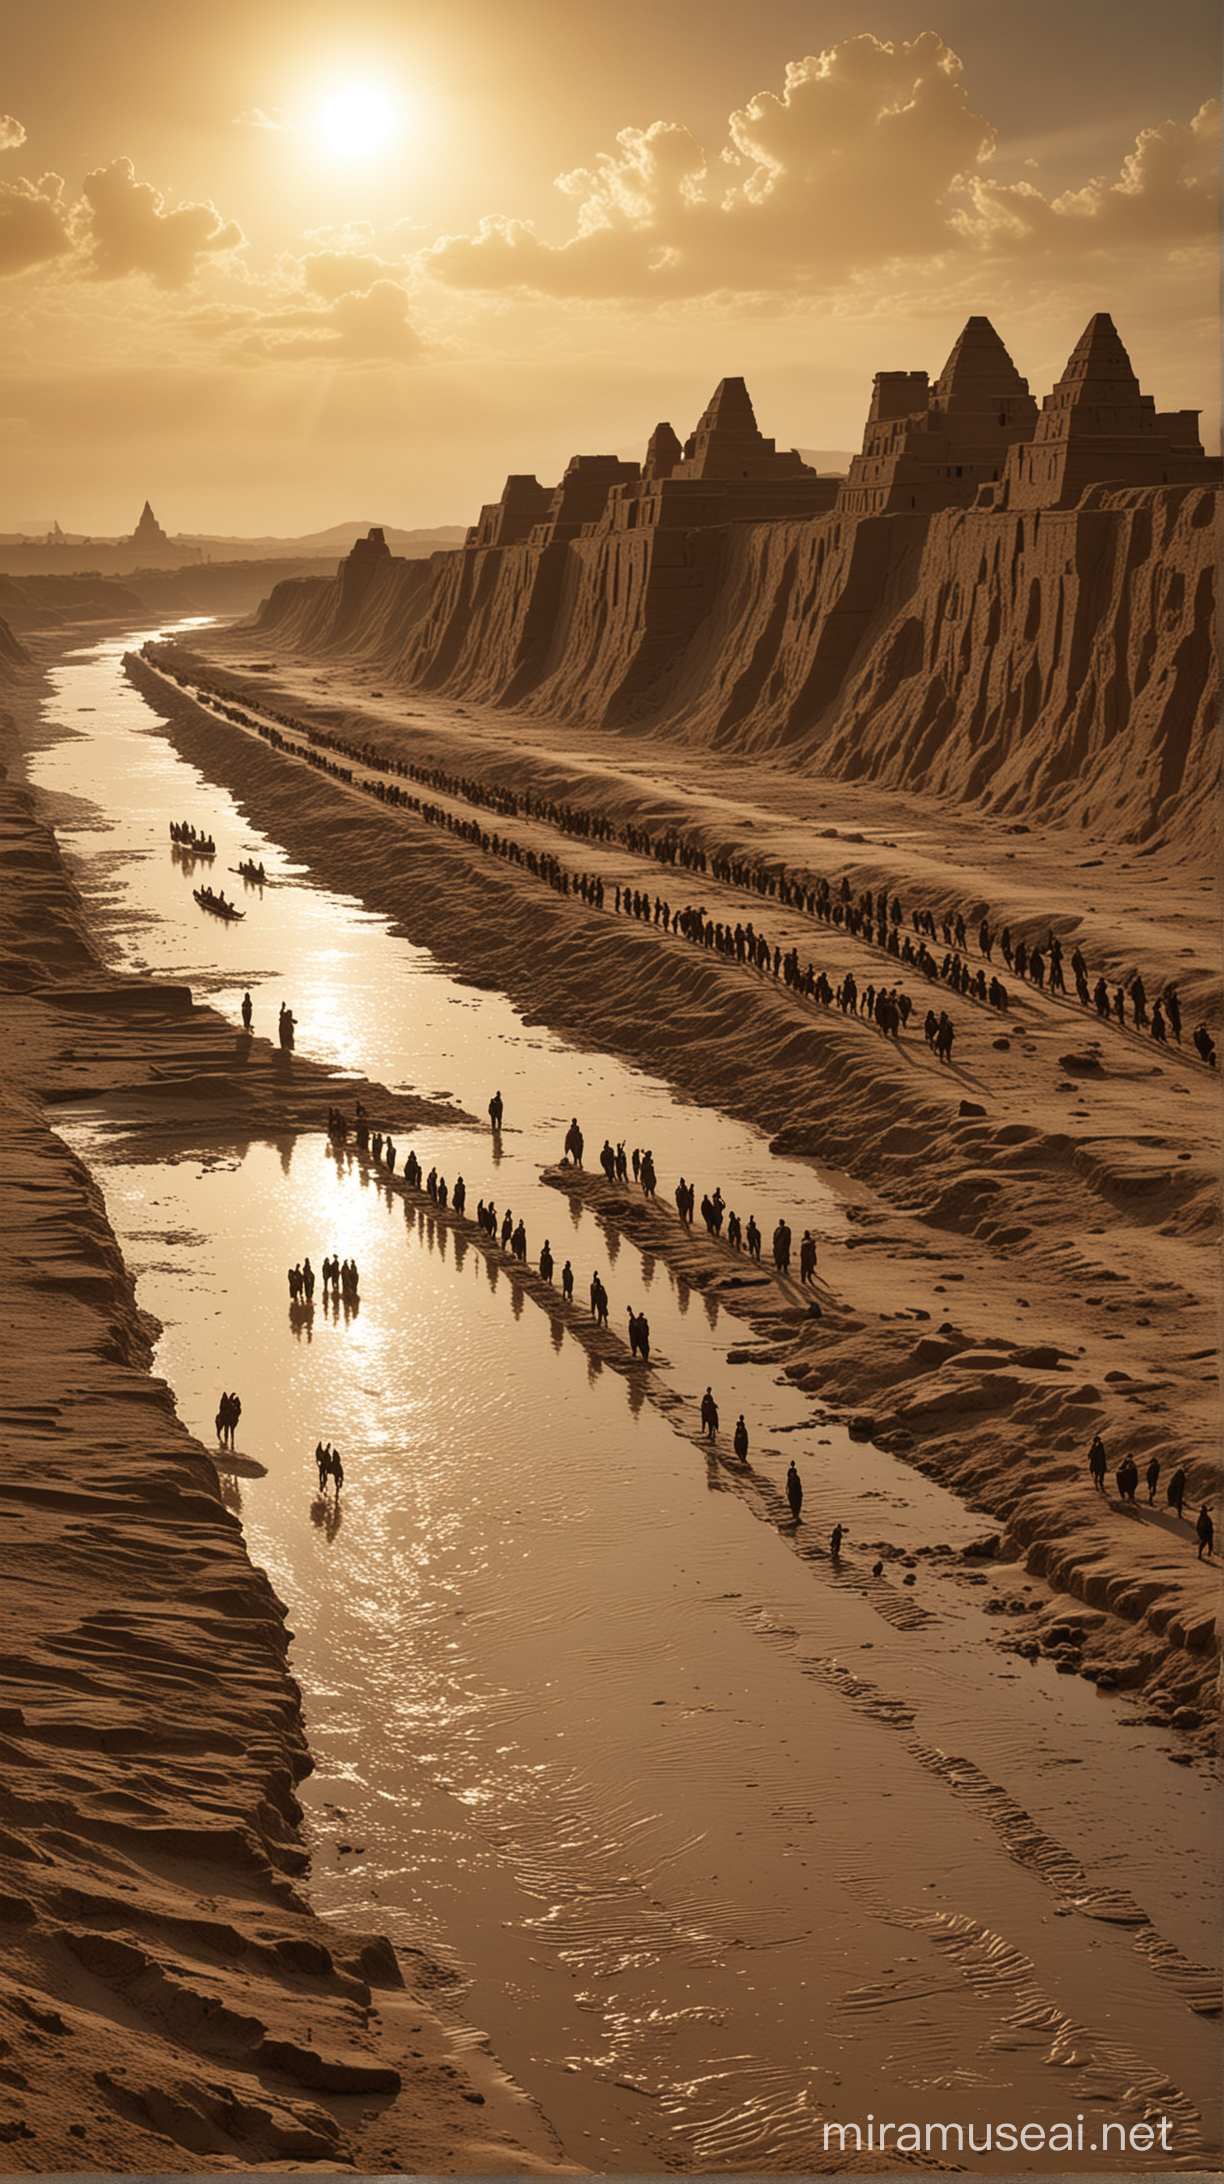 The silhouettes of ancient Sumerian cities rise along the banks of a muddy river, with depictions of the Anunnaki gods descending from the sky.
